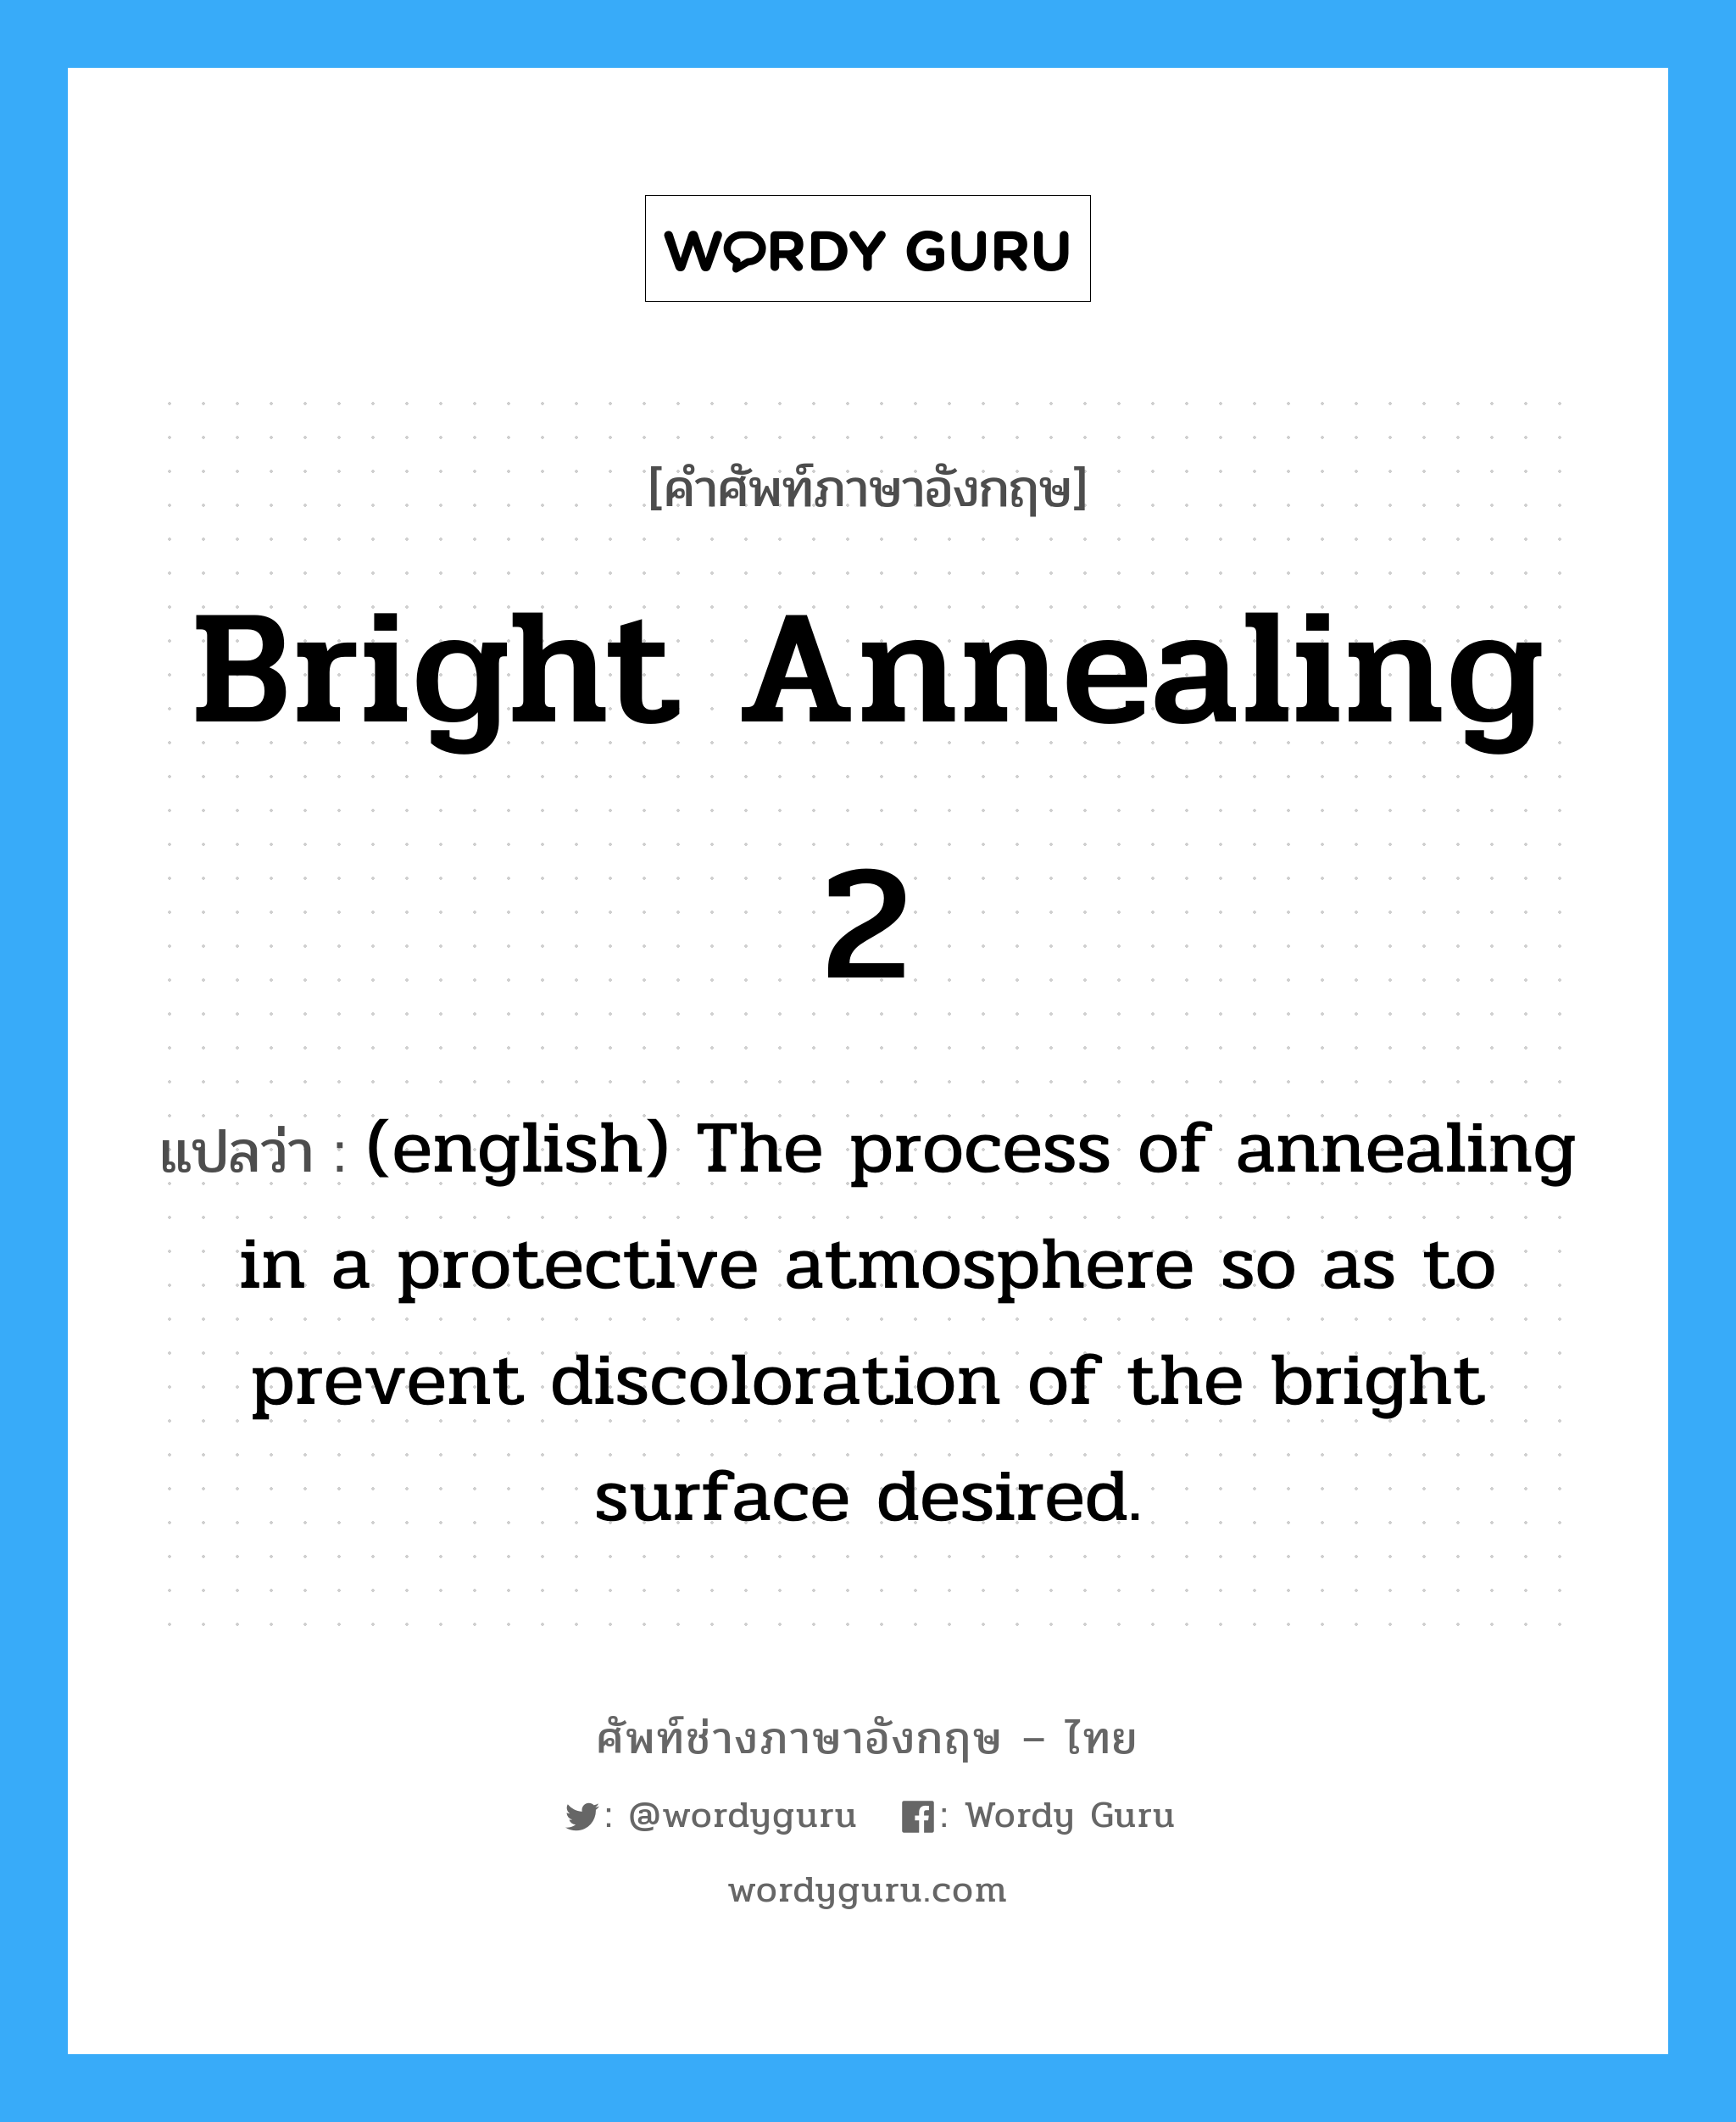 Bright Annealing 2 แปลว่า?, คำศัพท์ช่างภาษาอังกฤษ - ไทย Bright Annealing 2 คำศัพท์ภาษาอังกฤษ Bright Annealing 2 แปลว่า (english) The process of annealing in a protective atmosphere so as to prevent discoloration of the bright surface desired.